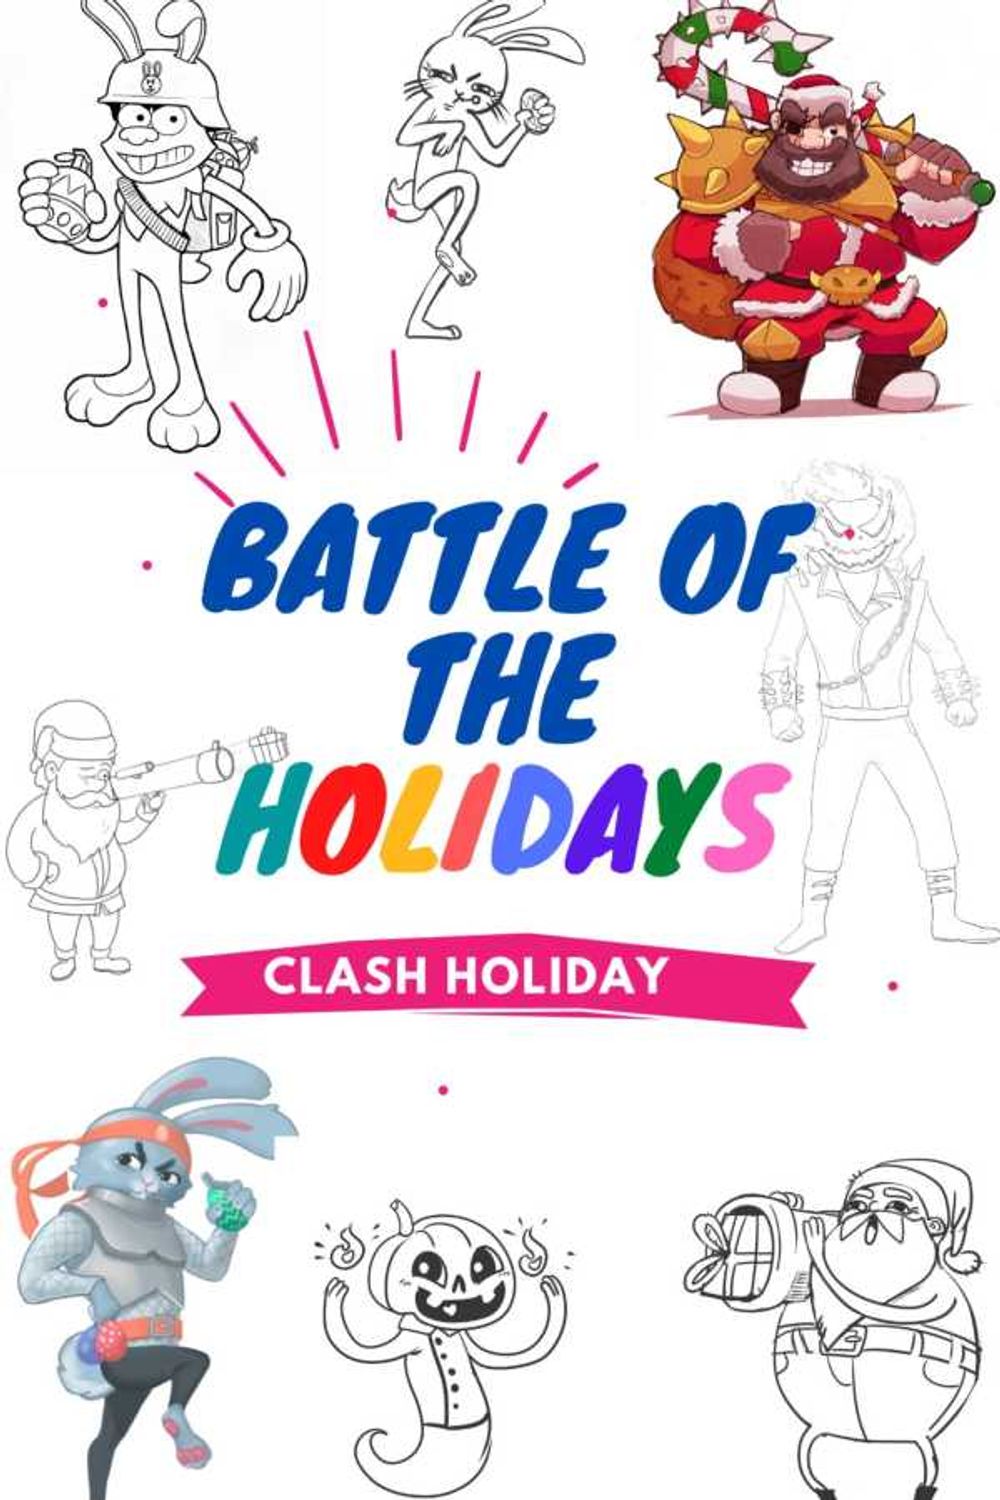 bw-battle-of-the-holidays-simplssimo-9788595133181